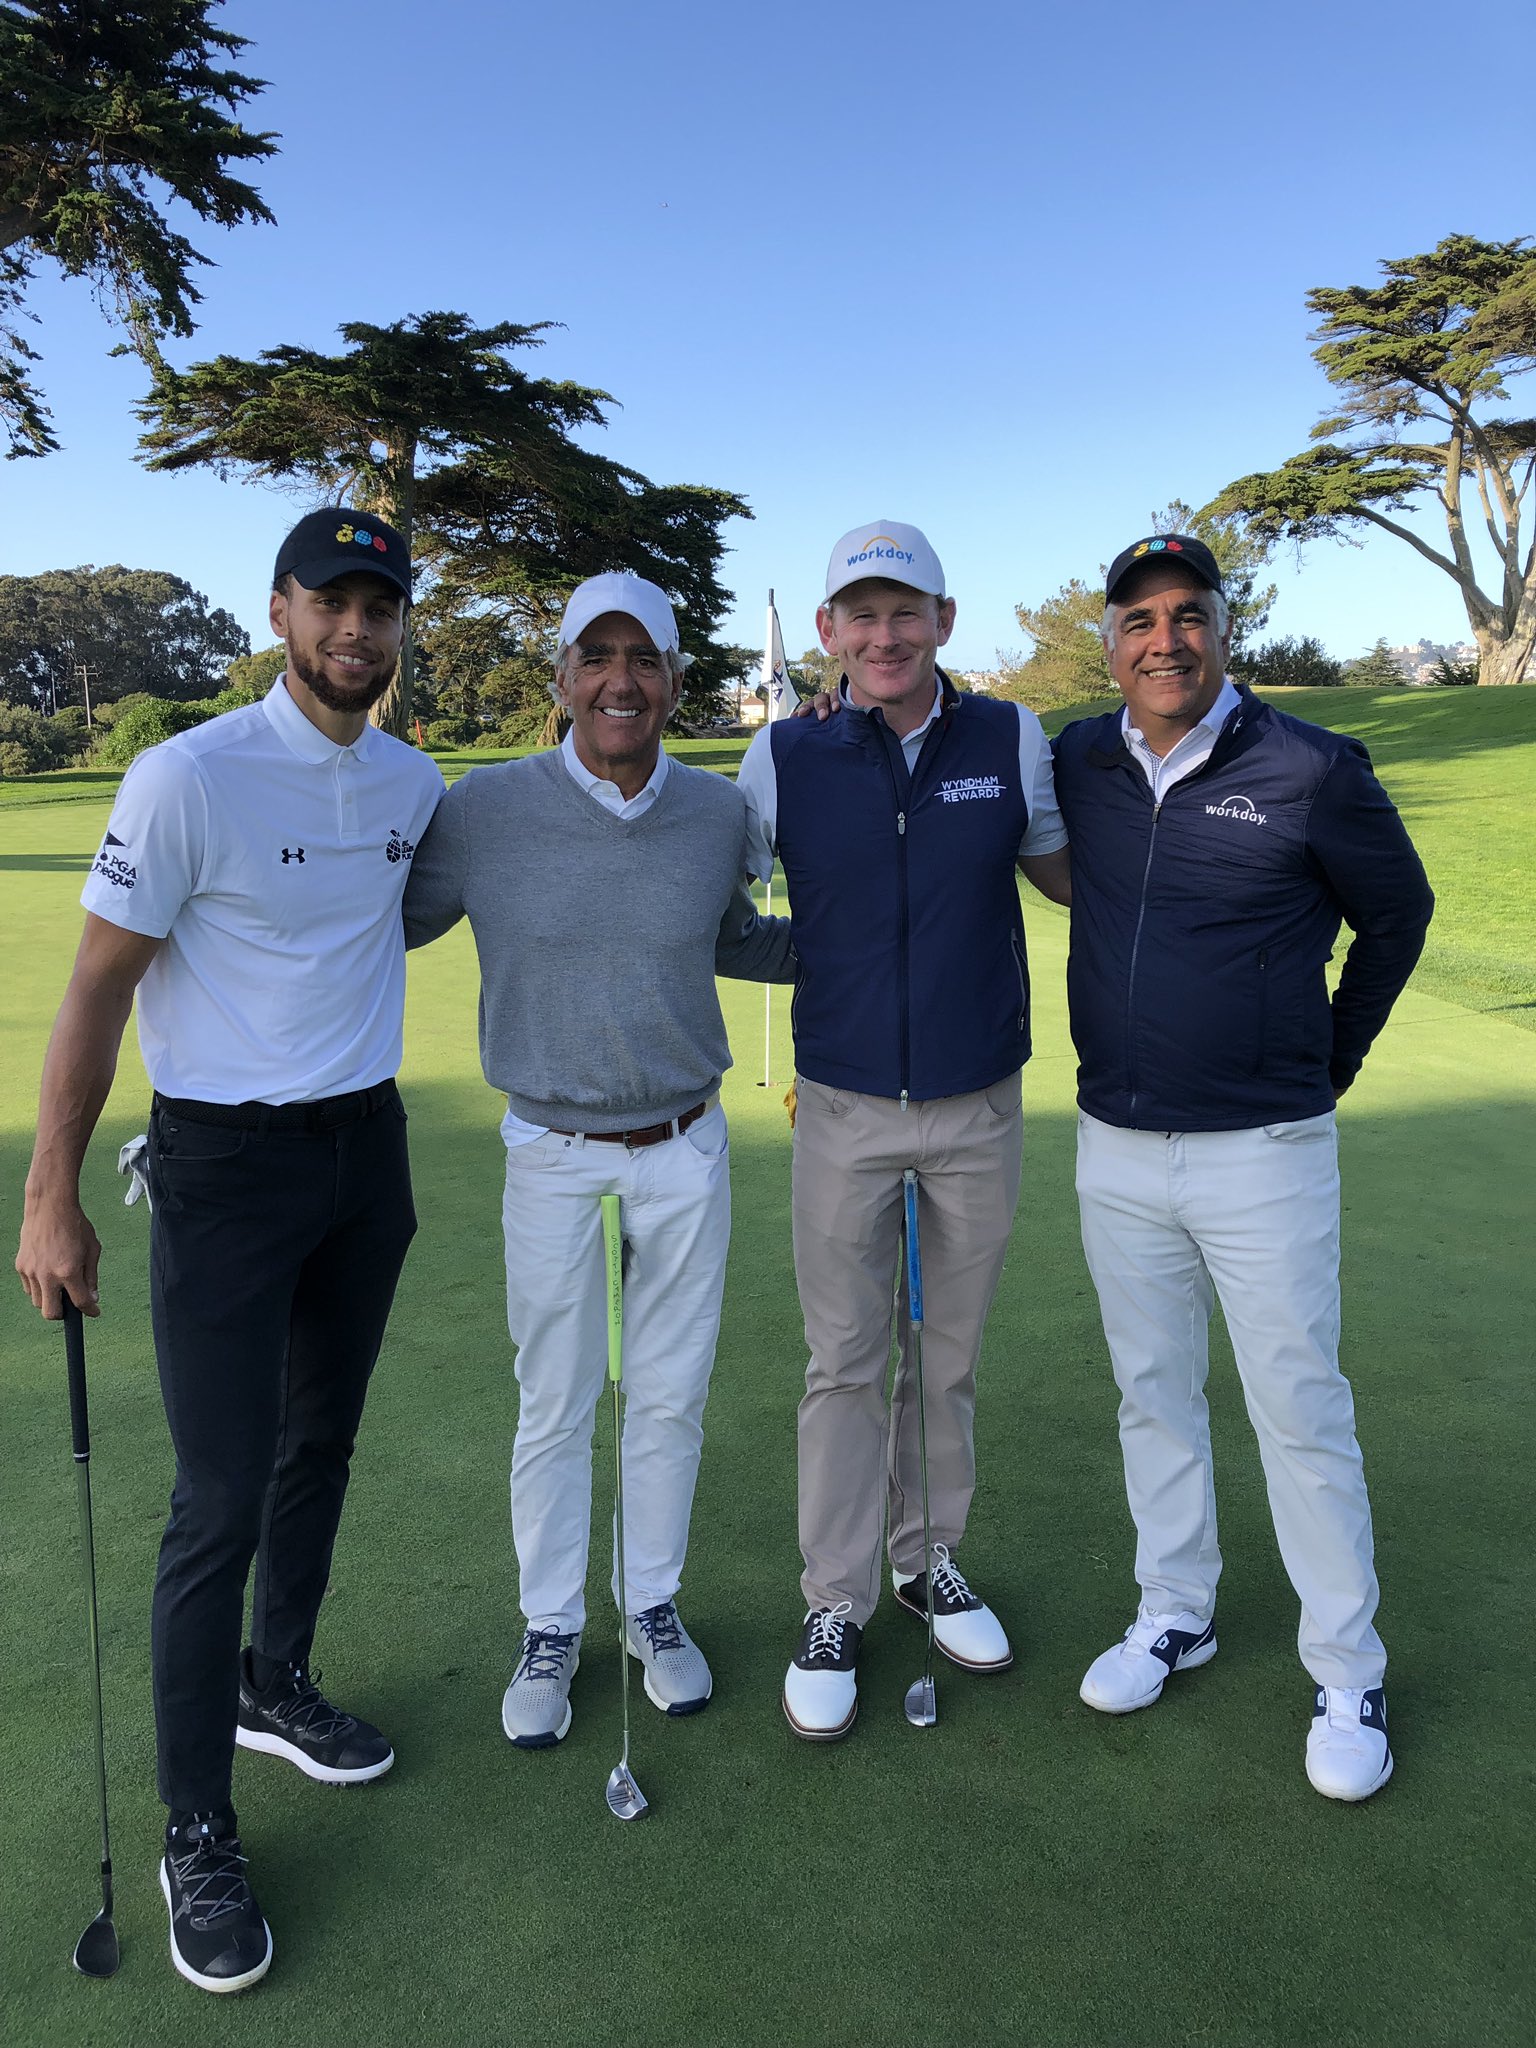 2 years after bringing the program back, Stephen Curry, Howard Golf team  continue thriving through Pebble Beach event - ABC7 San Francisco